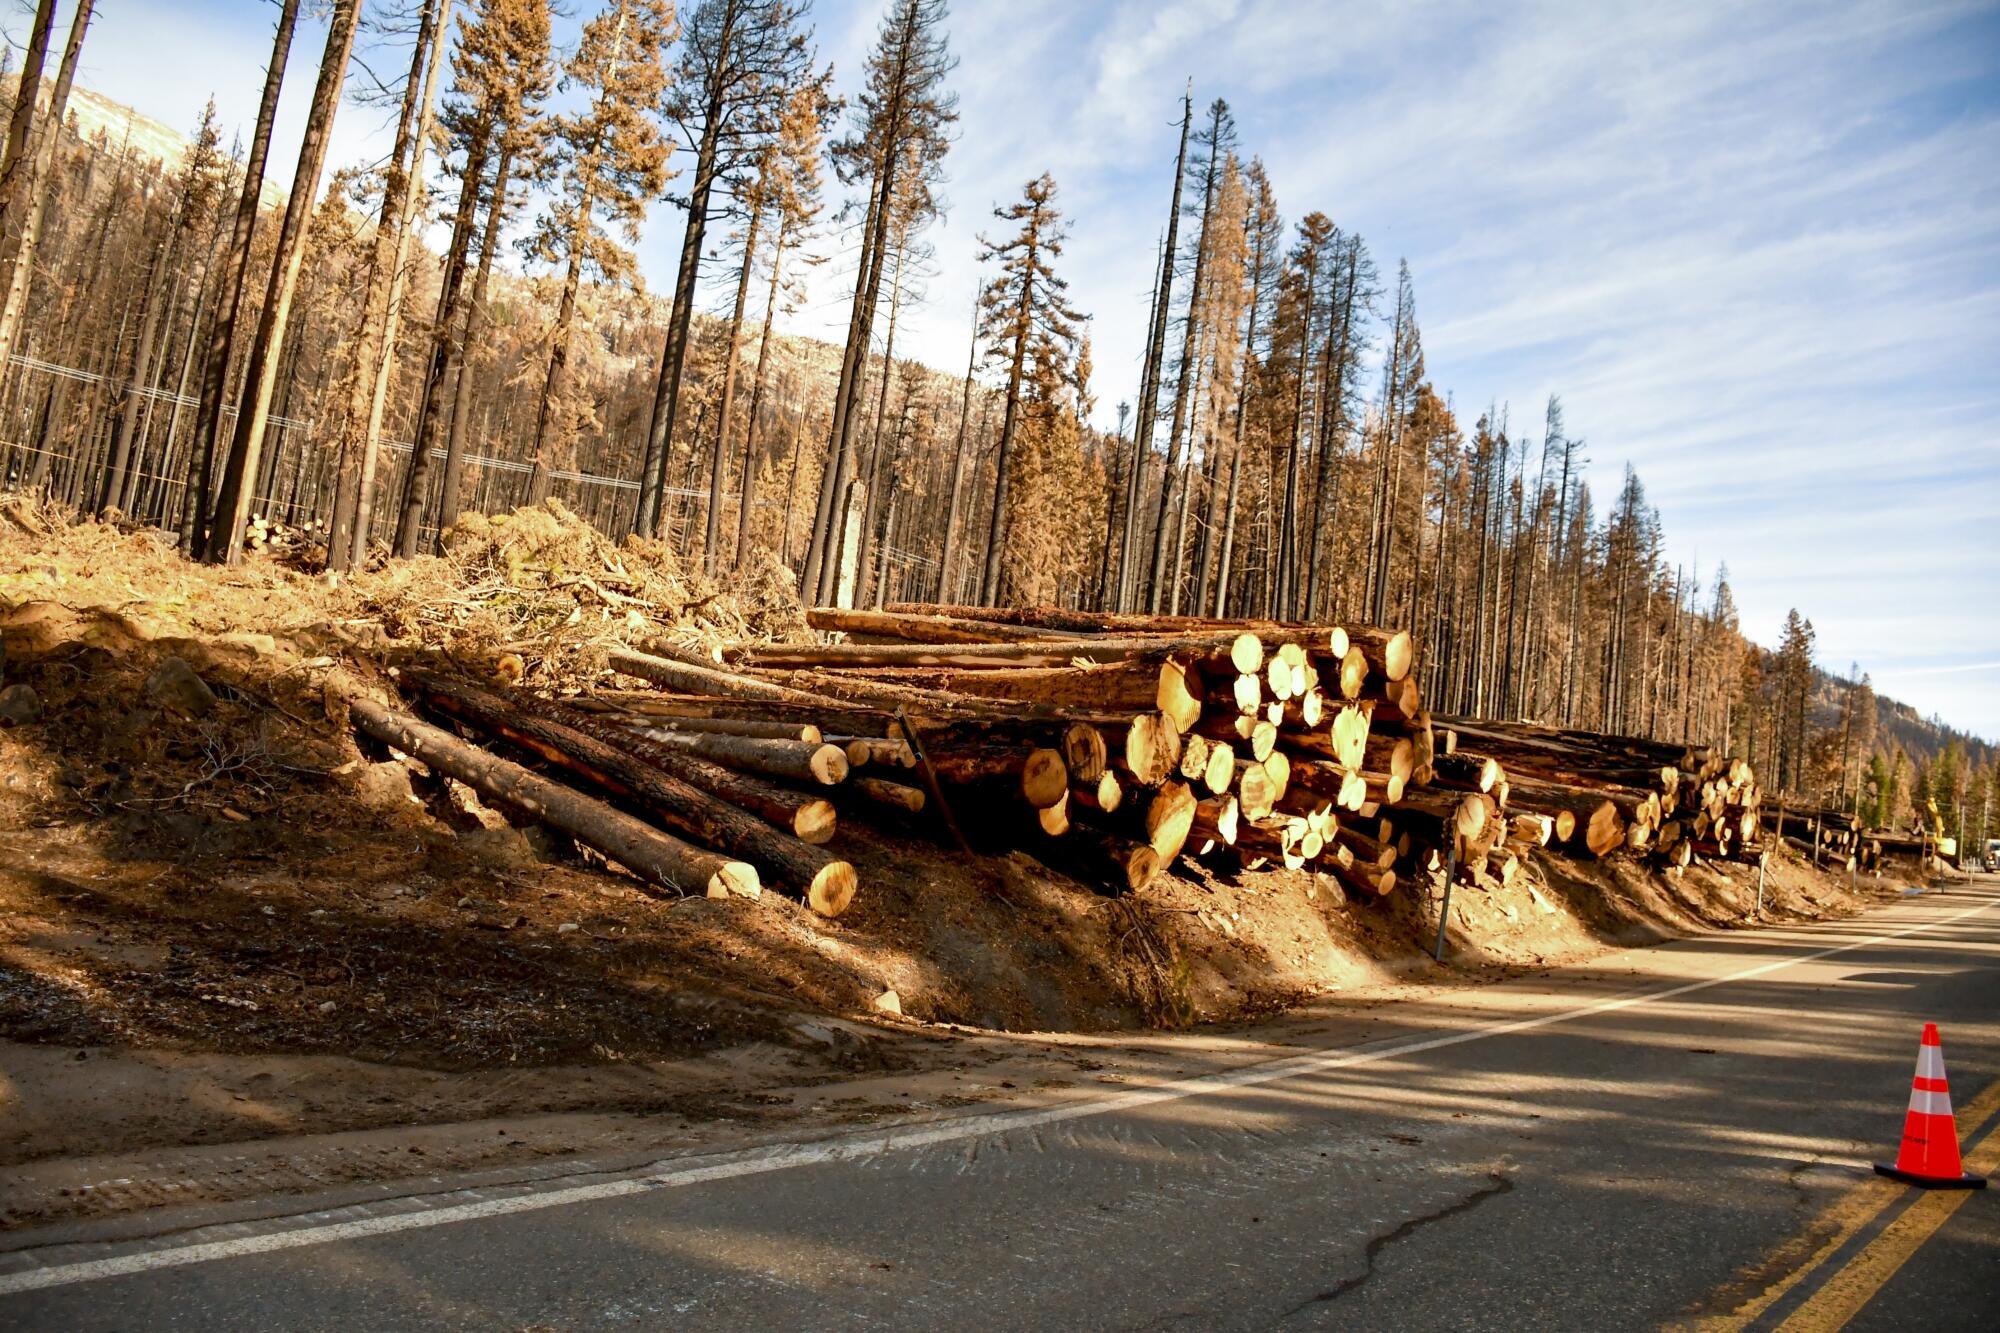 Along Highway 50 south of Lake Tahoe, repair work and blackened trees are a common sight.